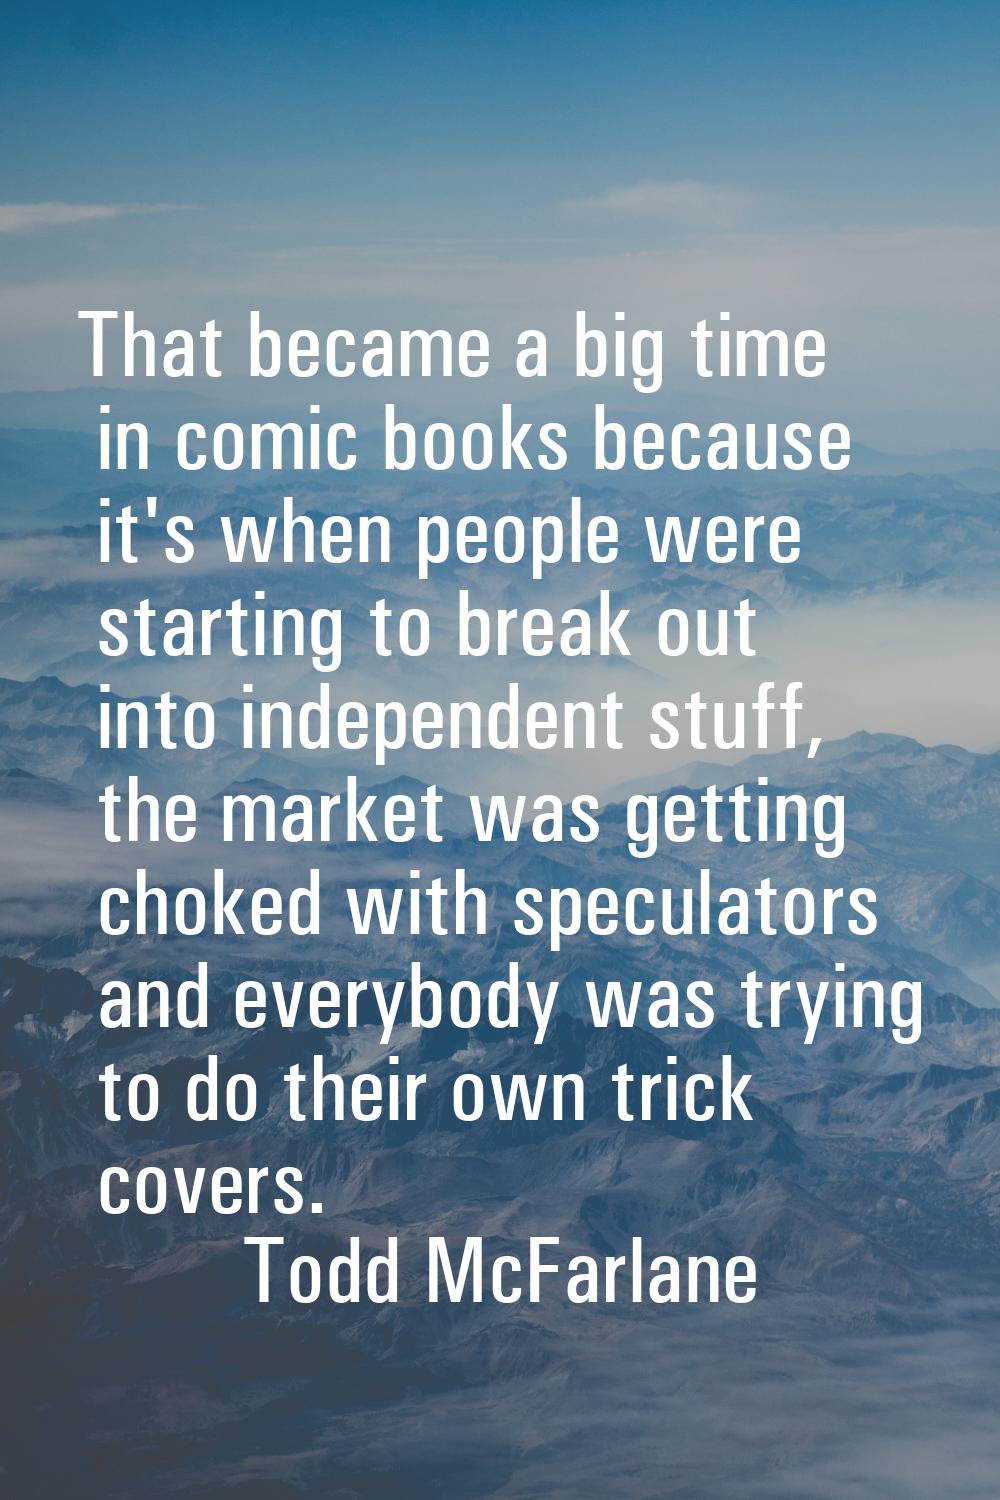 That became a big time in comic books because it's when people were starting to break out into inde